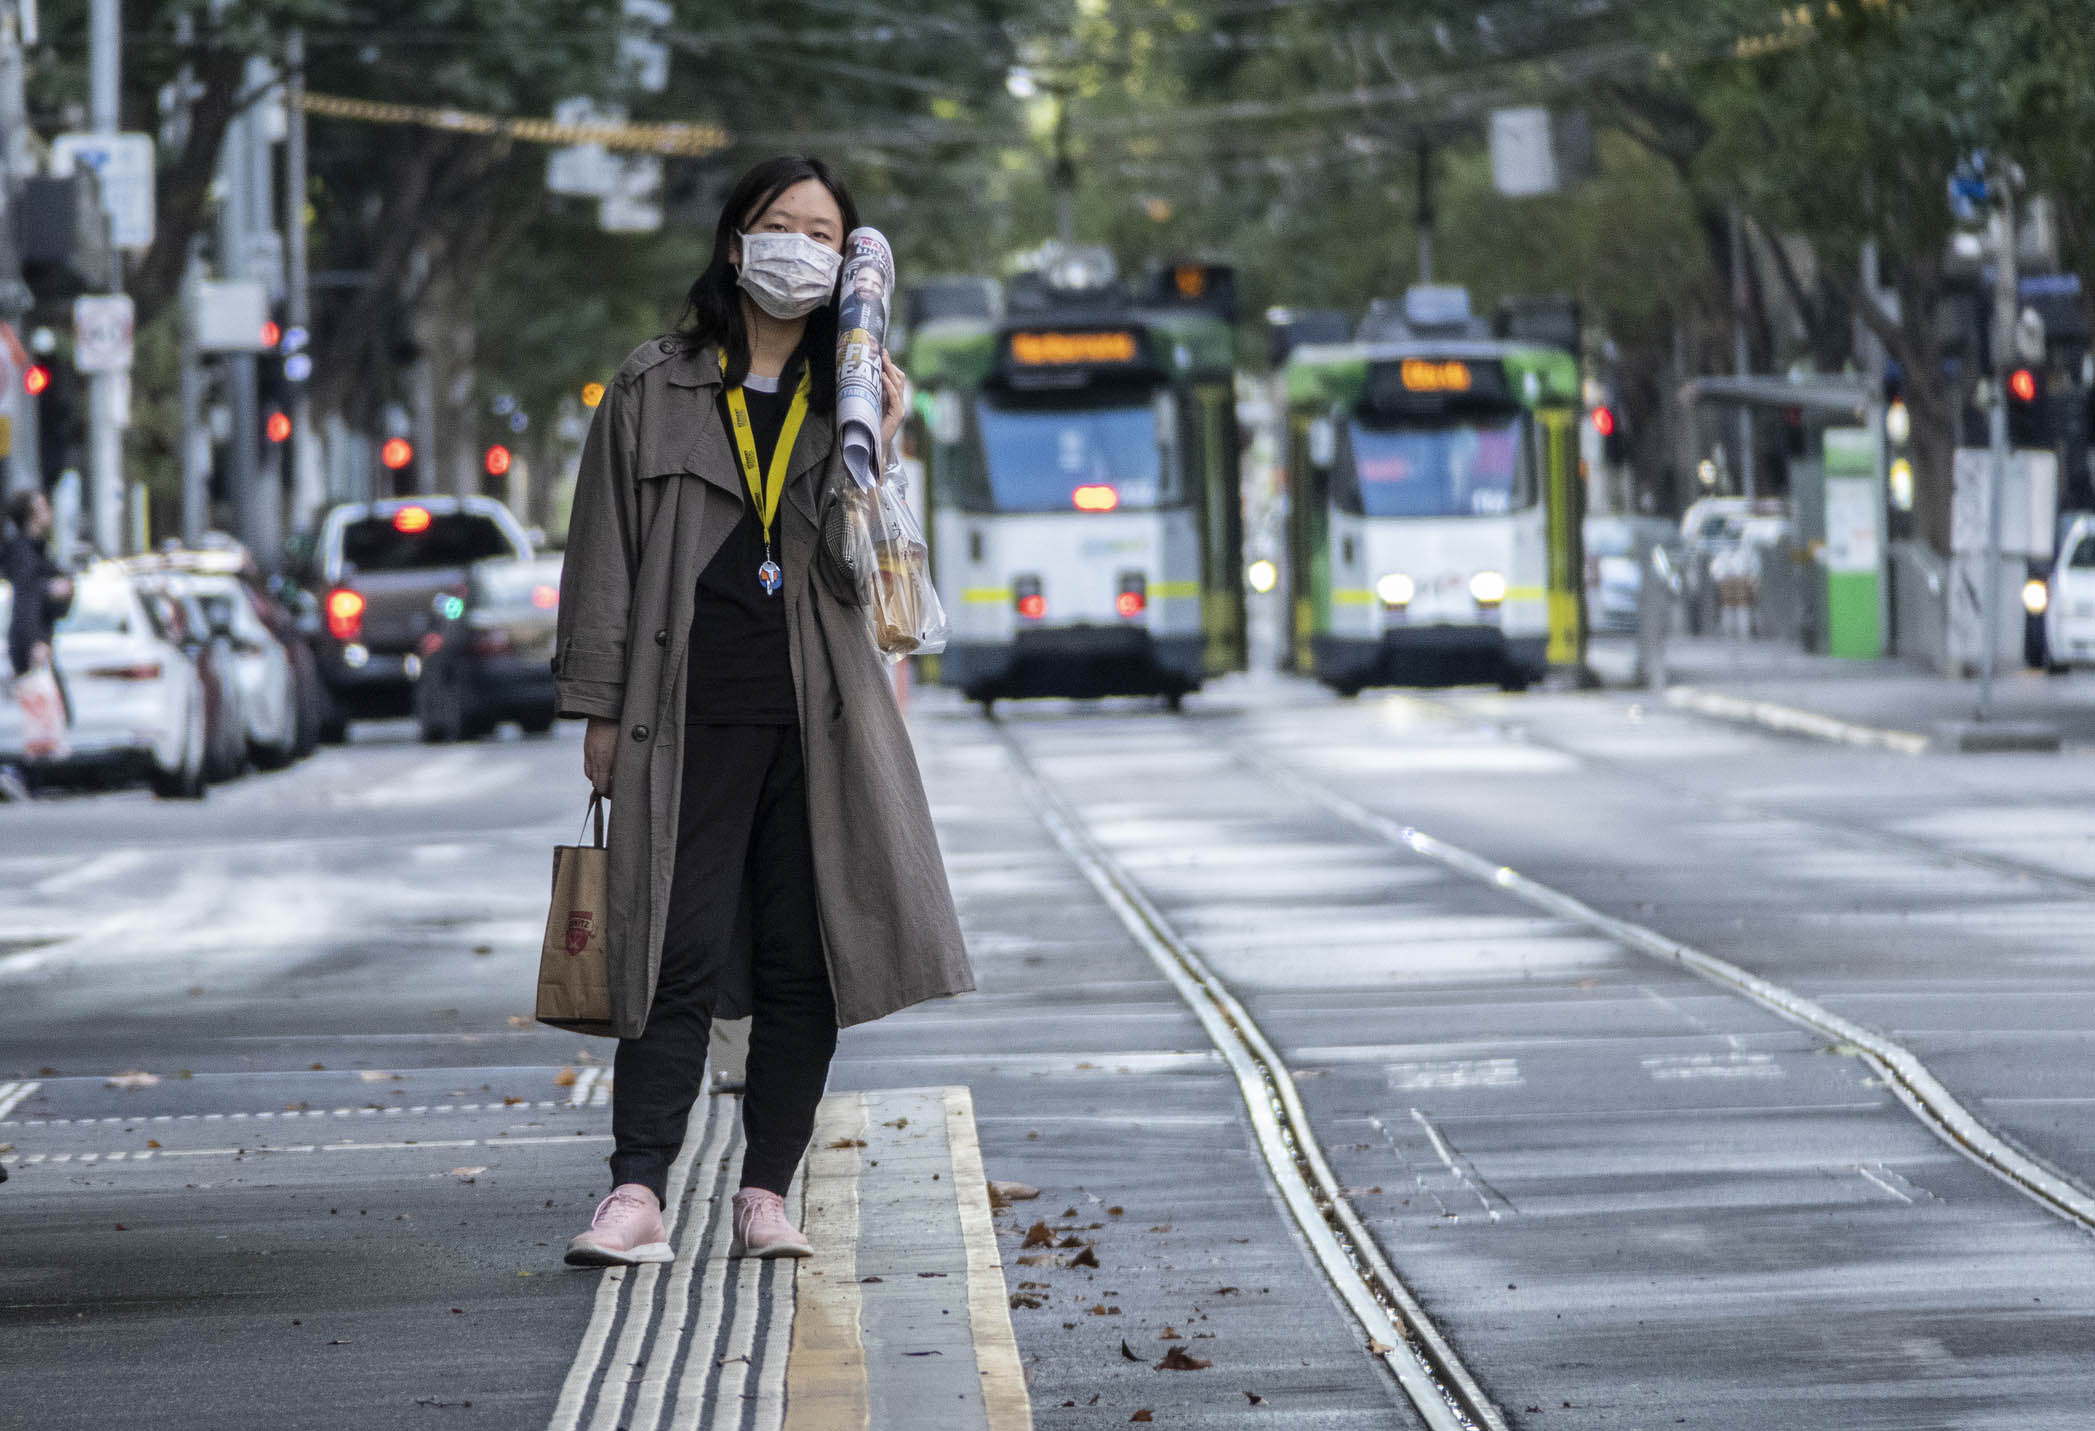 Image shows a person wearing a face mask while waiting at a tram stop during the COVID-19 pandemic.